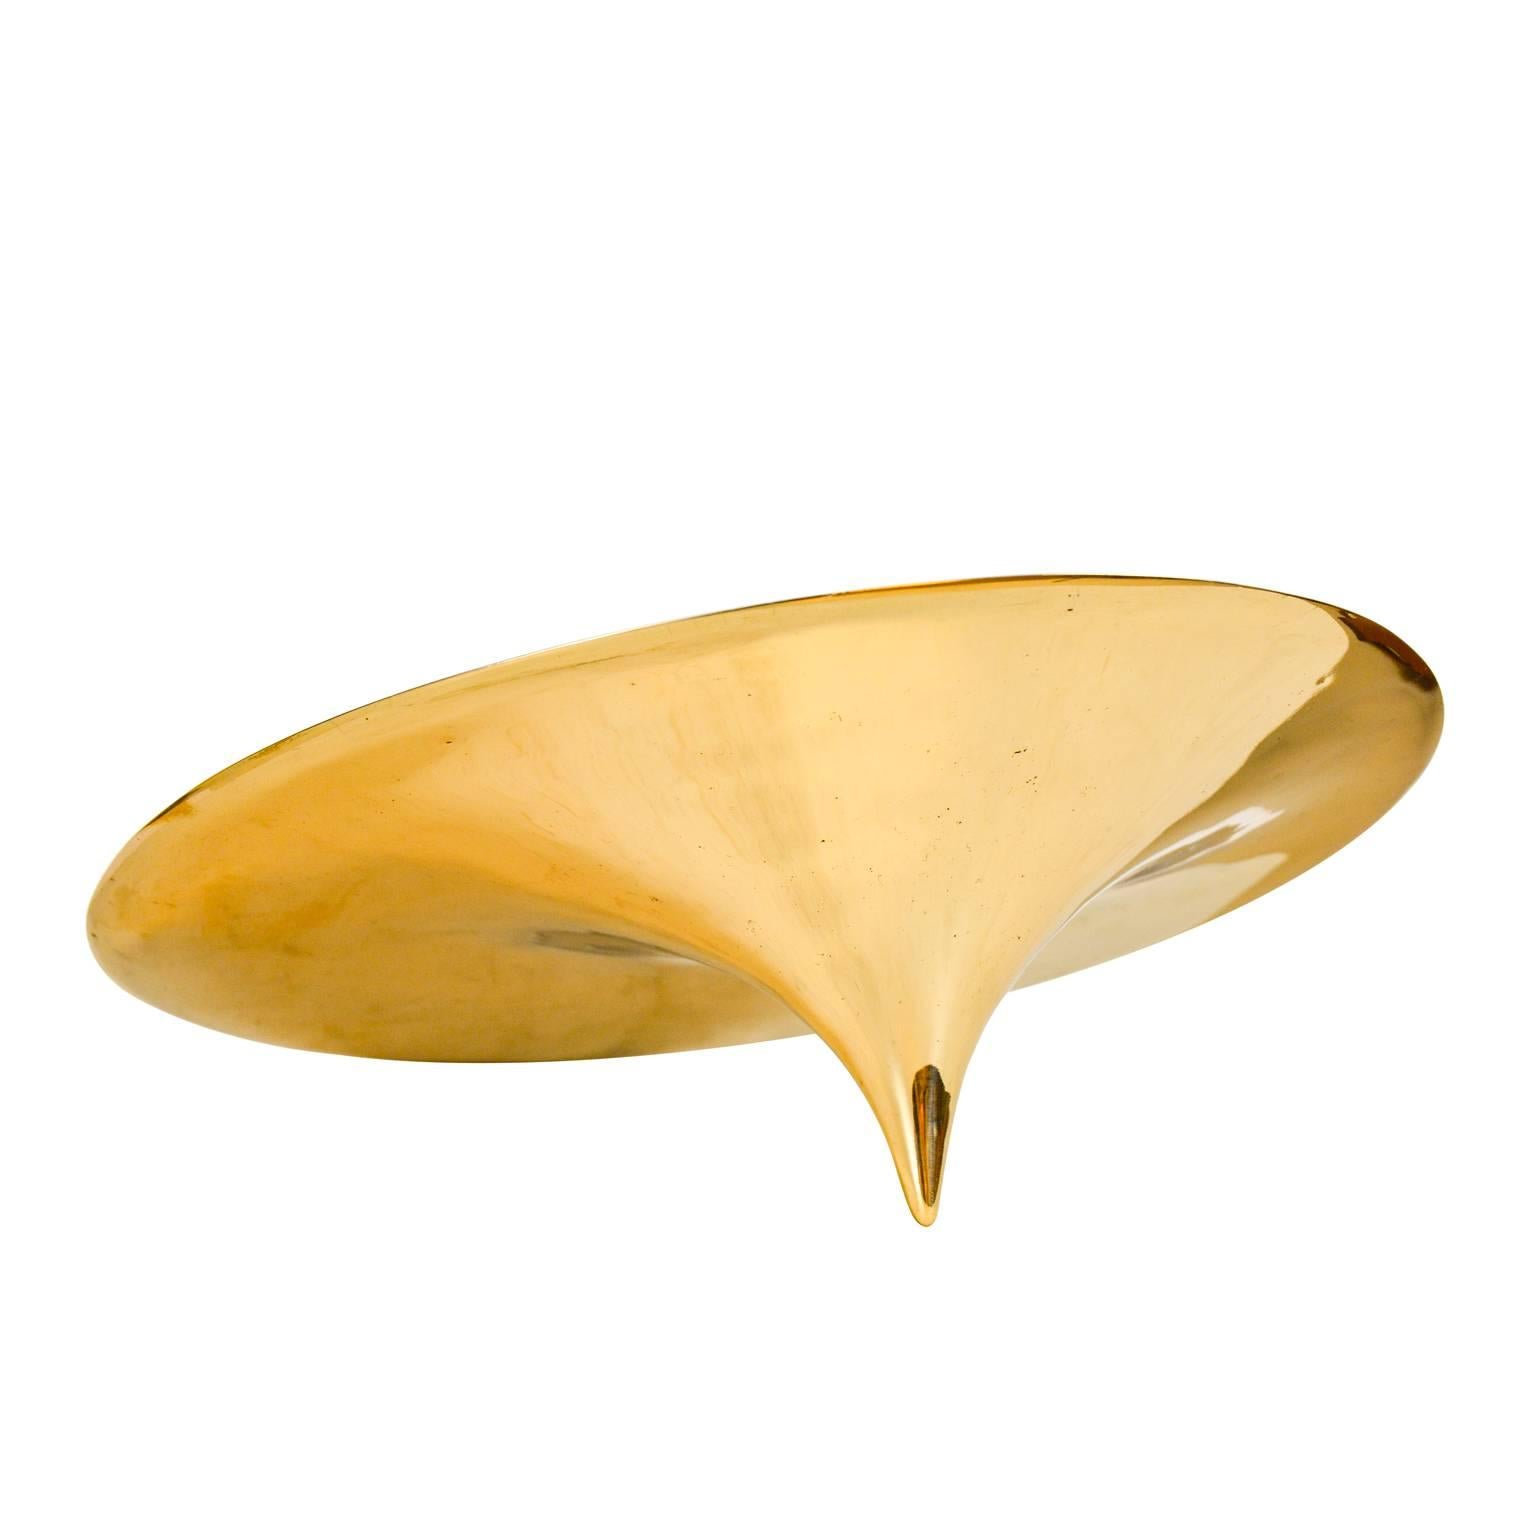 In Visible is a limited edition series of three bowls cast in bronze and highly polished to a mirror finish surface. Ovoid shapes in different sizes with only one axis of symmetry, the bowls circular shape suggests that they have no beginning or